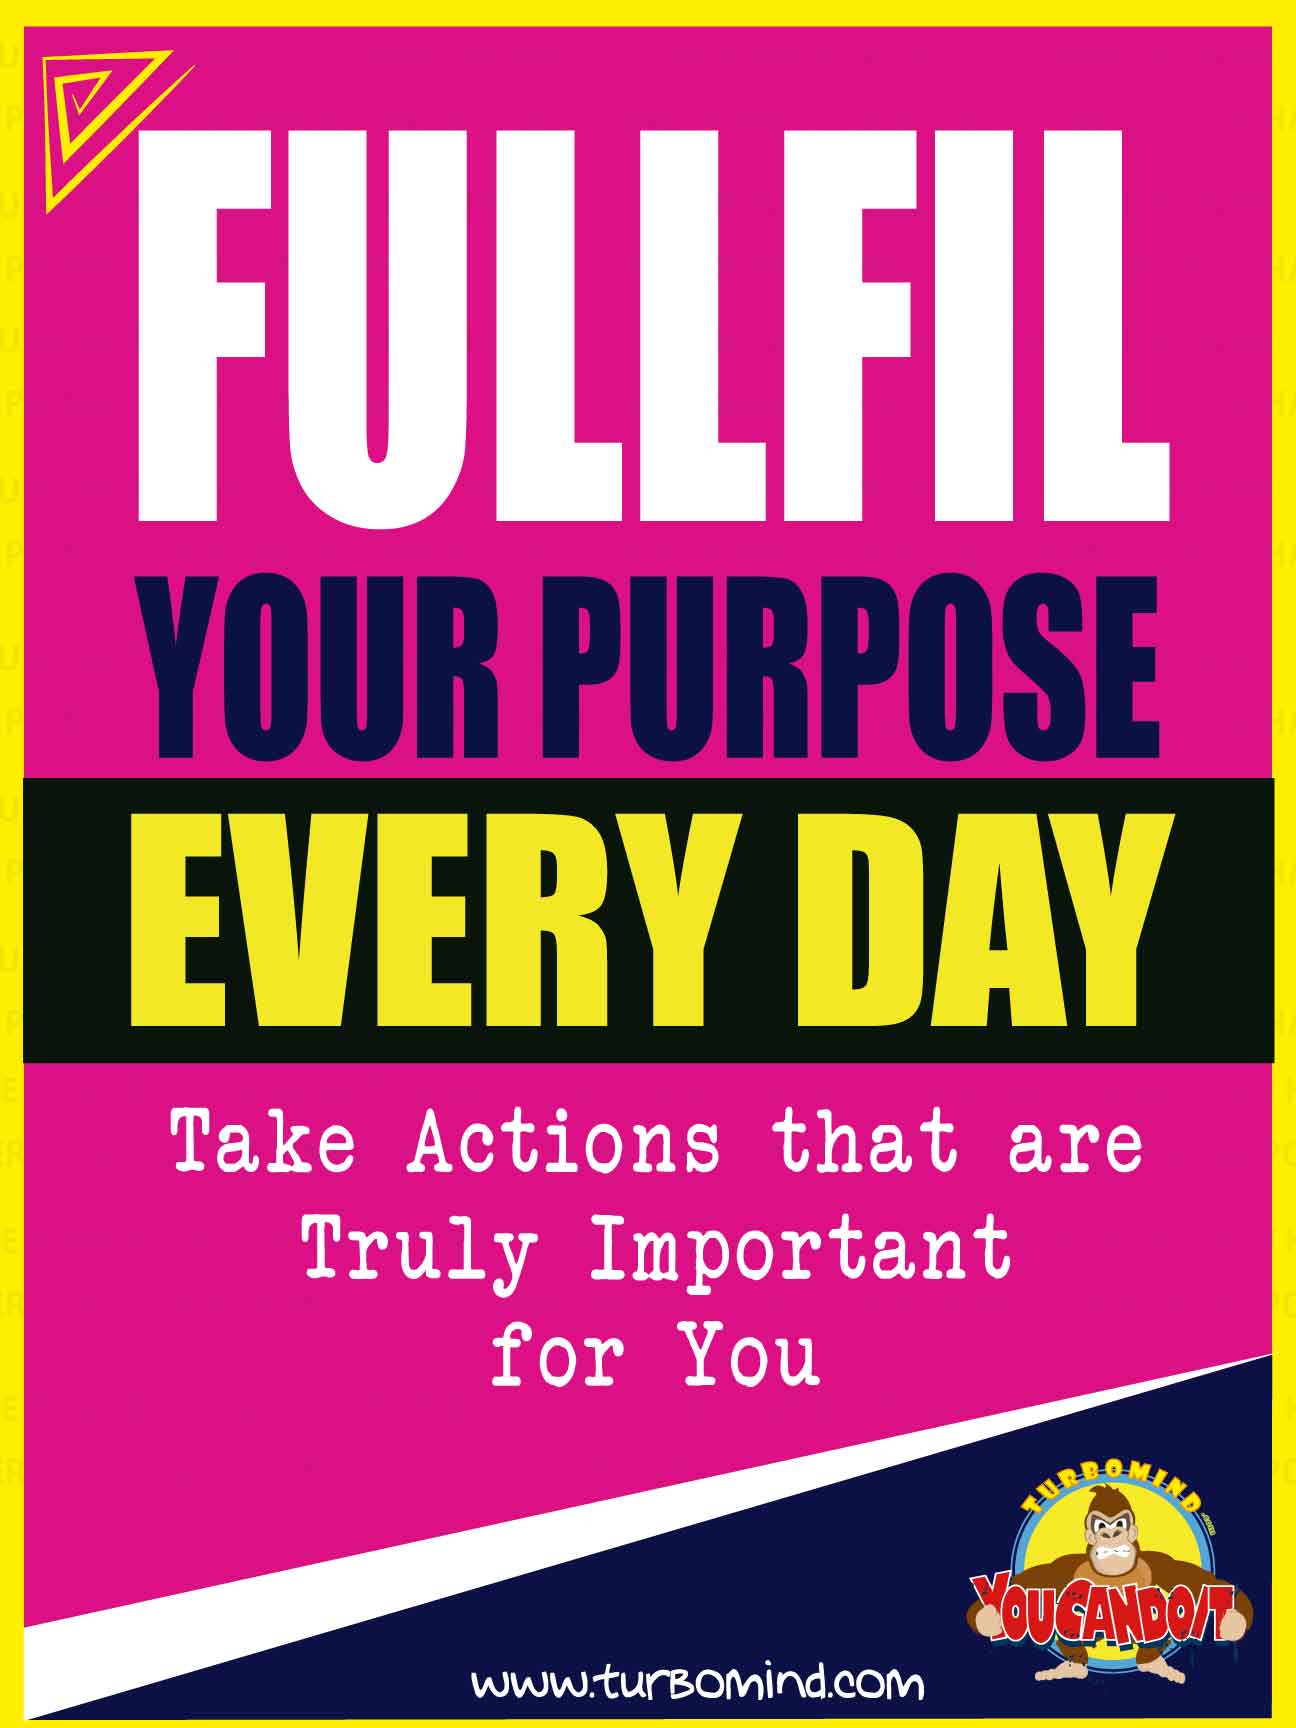 FULFILL YOUR PURPOSE EVERYDAY.